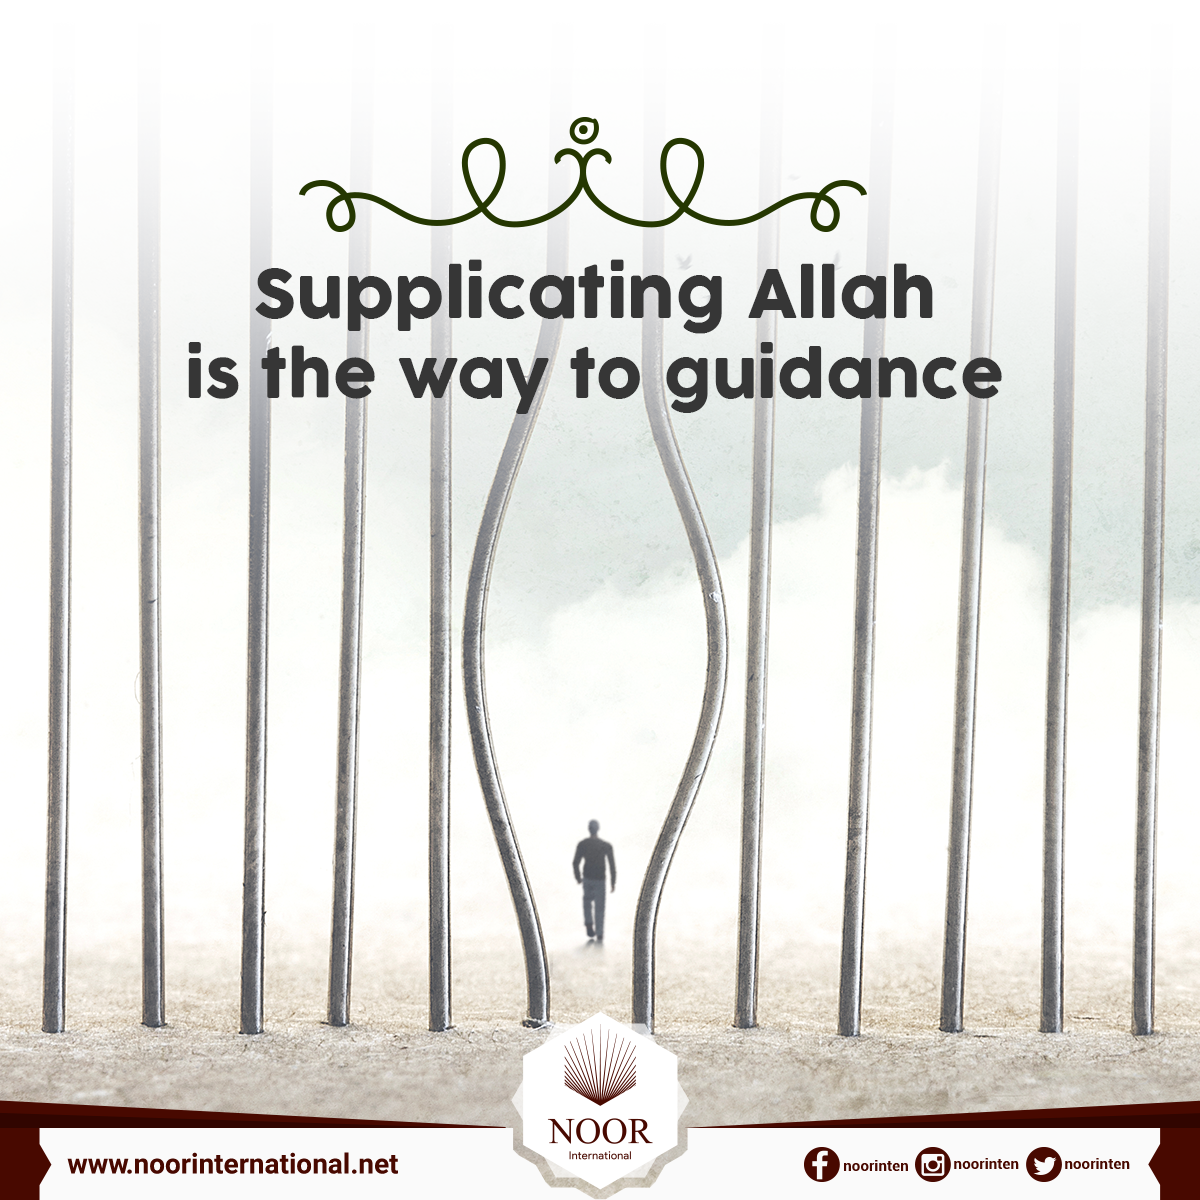 Supplicating Allah is the way to guidance